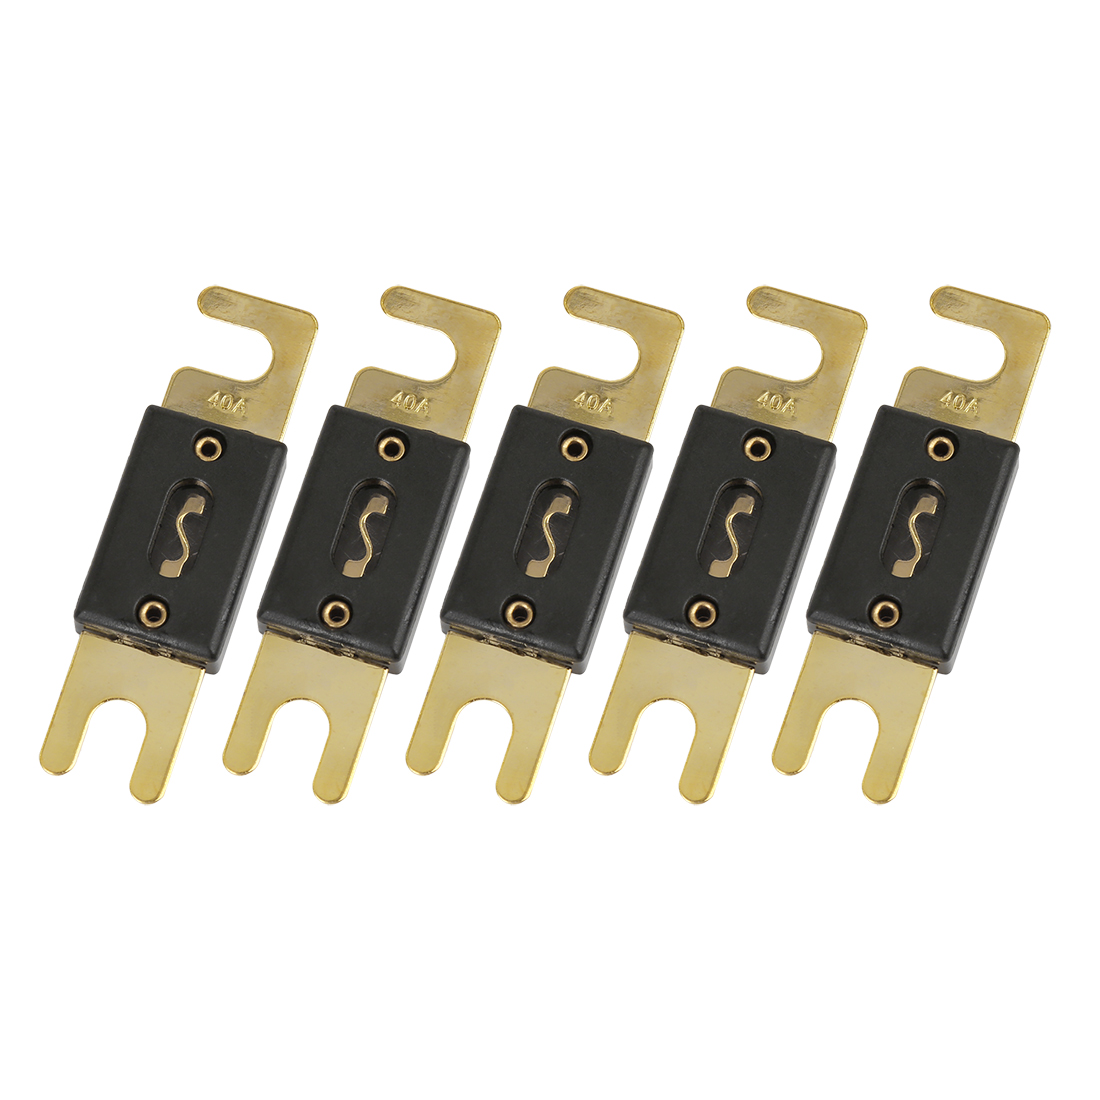 Unique Bargains 5 Pcs 40 Amp ANL Fuse Gold Tone Plated for Car Audio Video Stereo